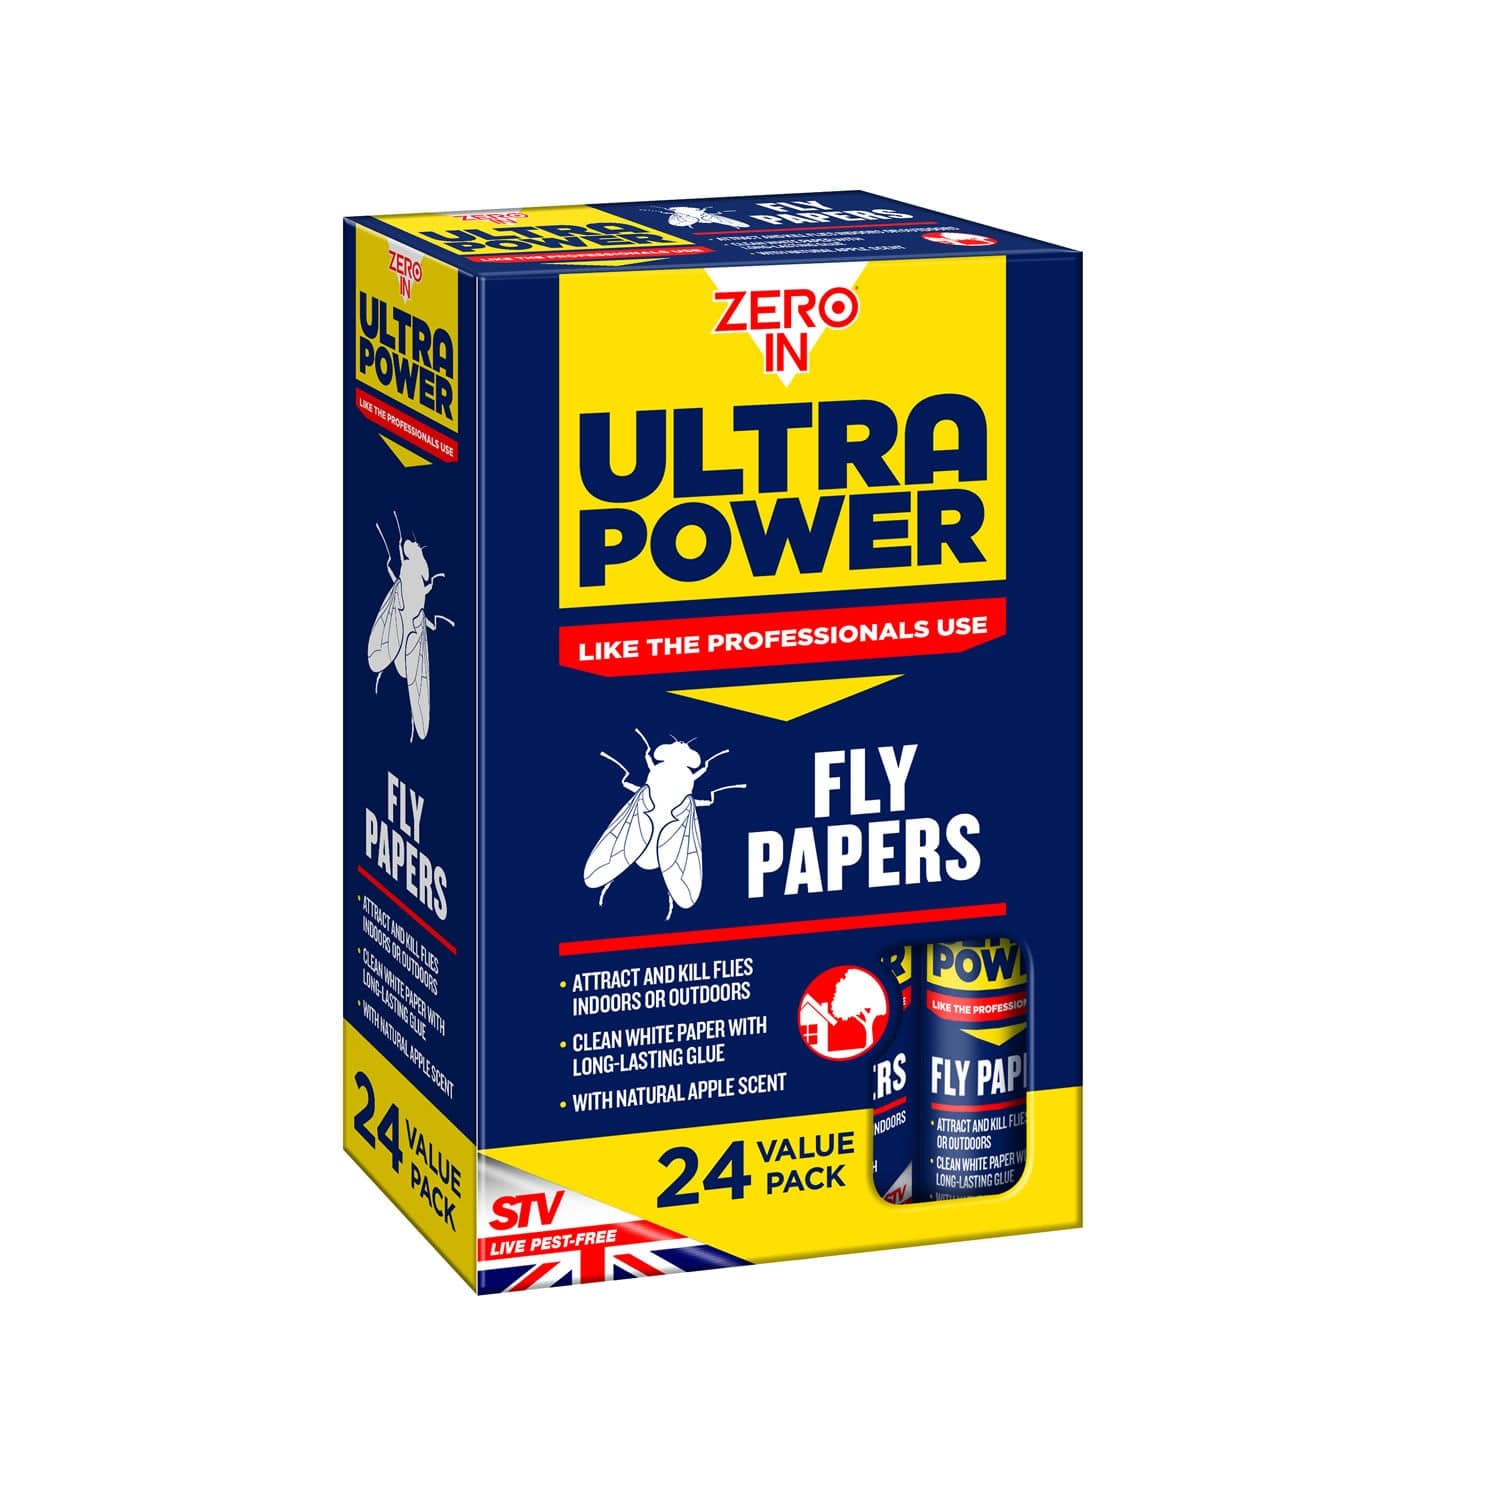 Zero in ultra power fly papers